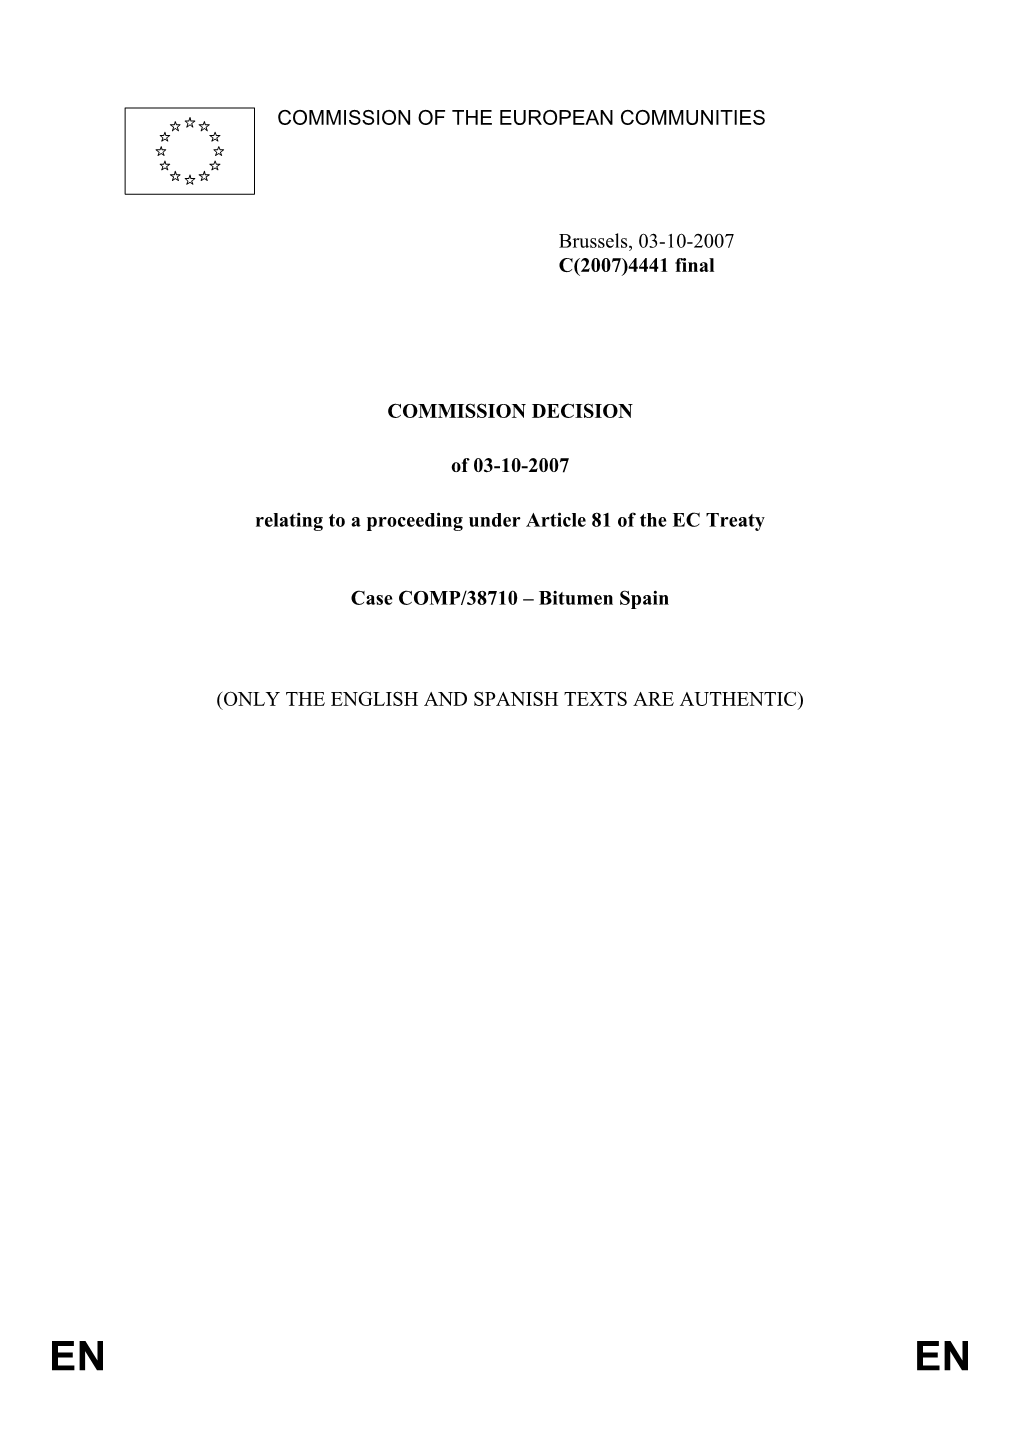 4441 Final COMMISSION DECISION of 03-10-2007 Relating to a Pr